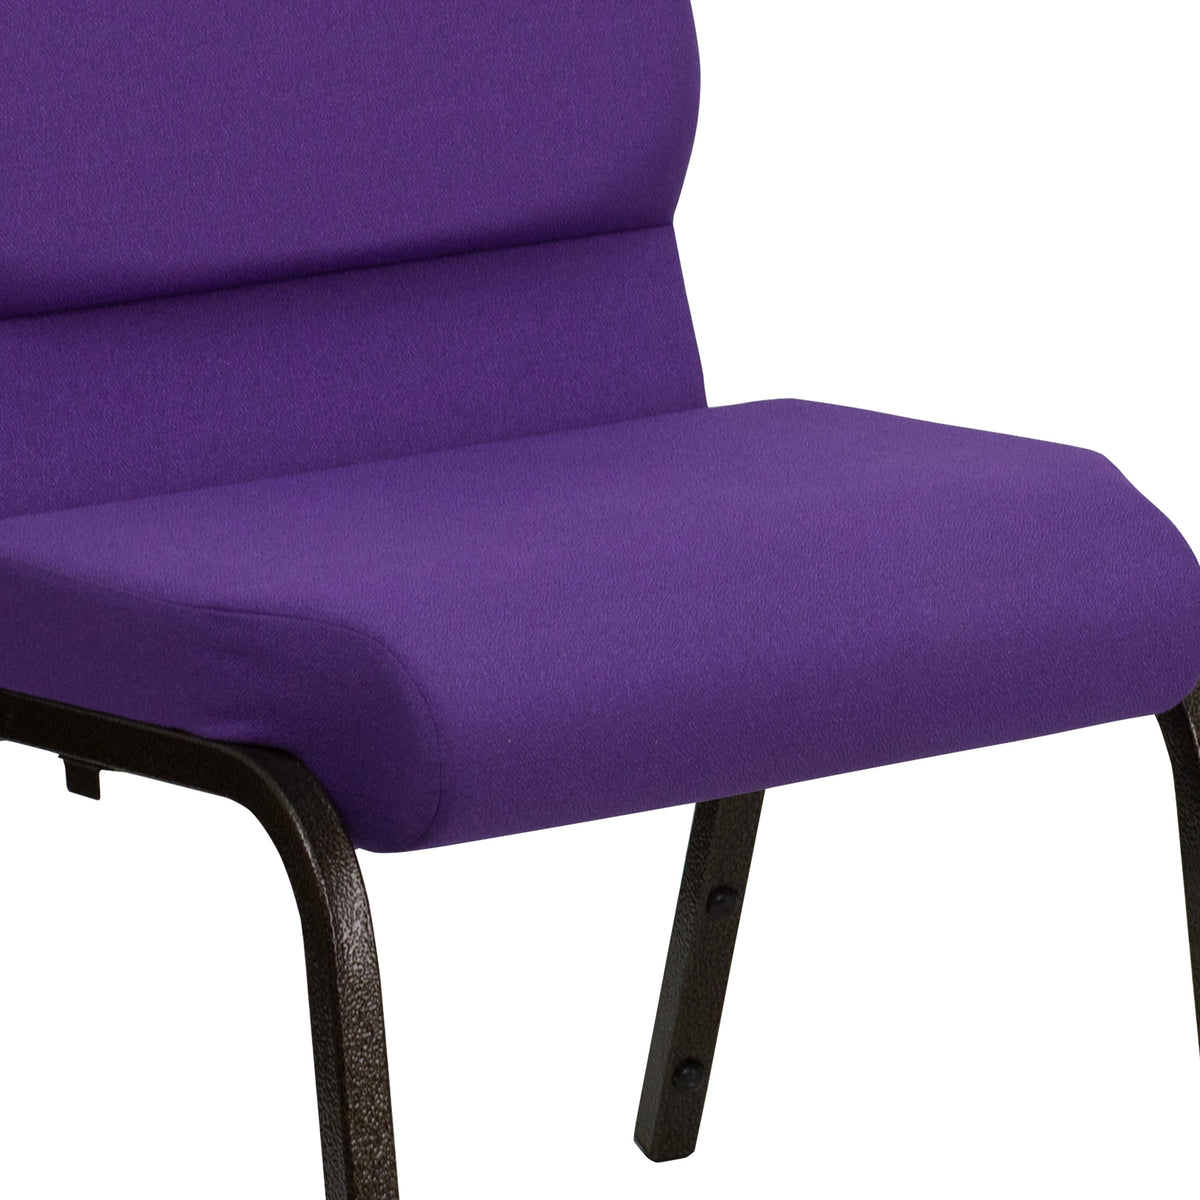 Purple Fabric/Gold Vein Frame |#| Stacking Auditorium Chair with 19inch Seat - Purple Fabric/Gold Vein Frame